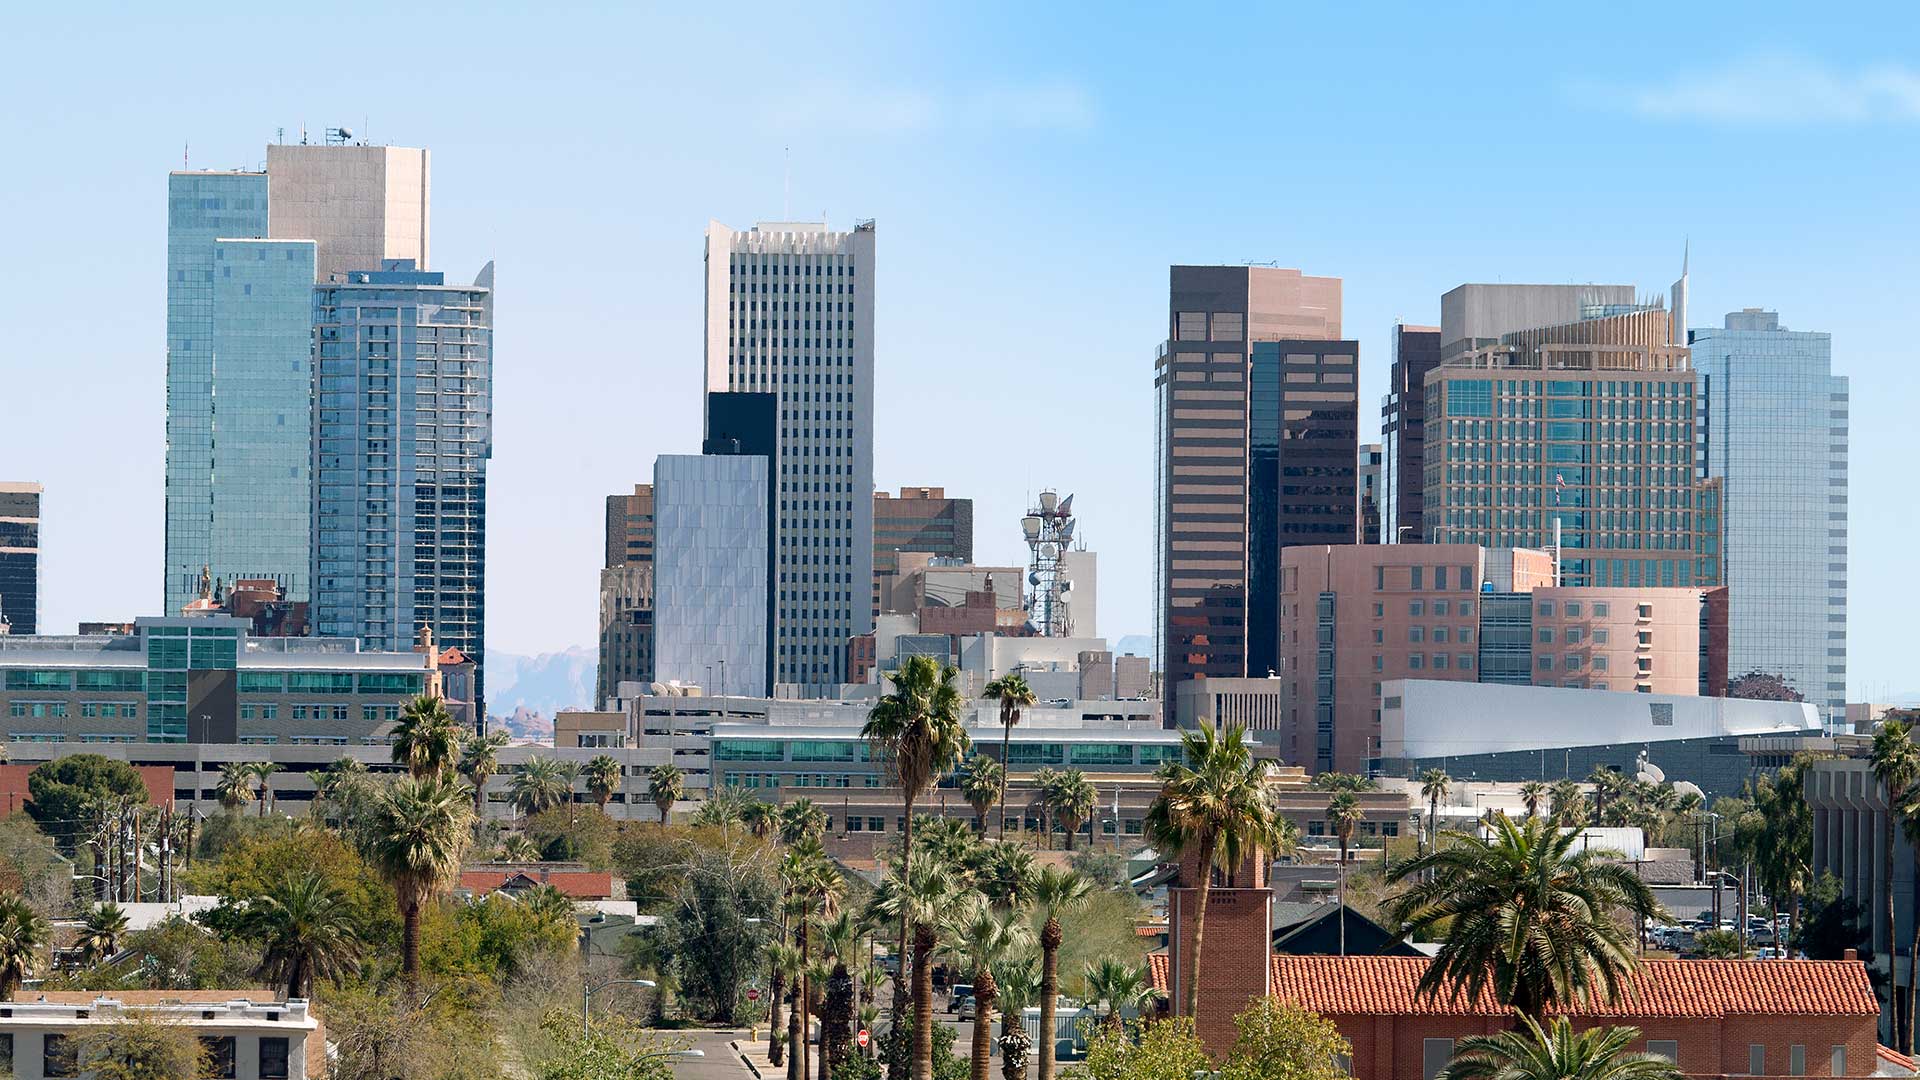 Skyline of phoenix, arizona, featuring modern high-rise buildings under a clear blue sky with scattered palm trees in the foreground.